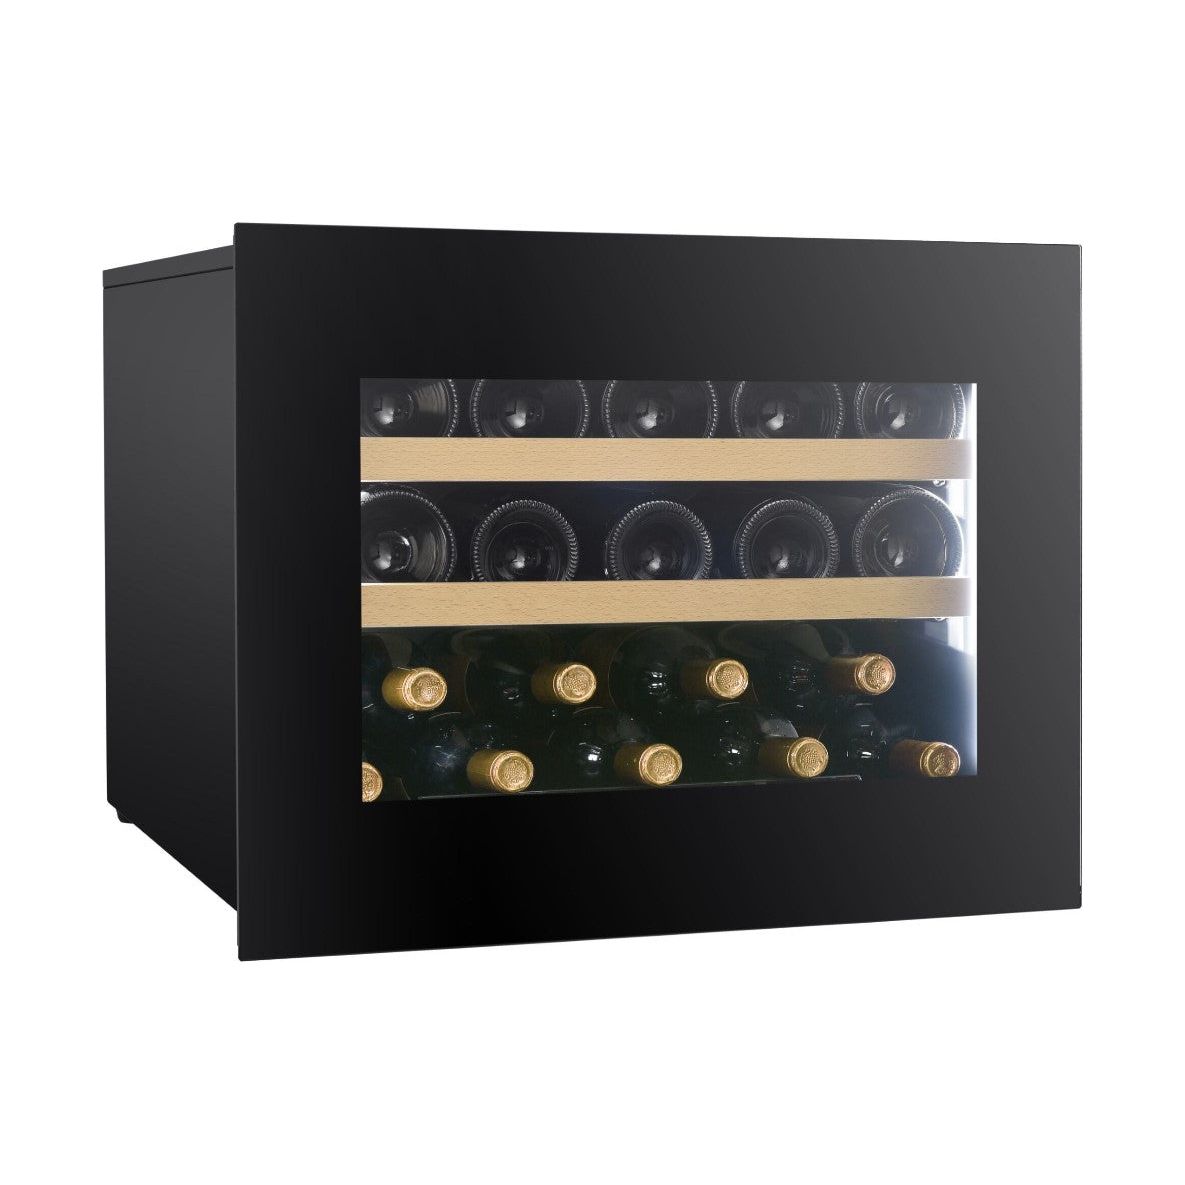 Dunavox Noble-19.TO - Single Zone 19 Bottle - Integrated Wine Cooler - DVN-19.50B.TO